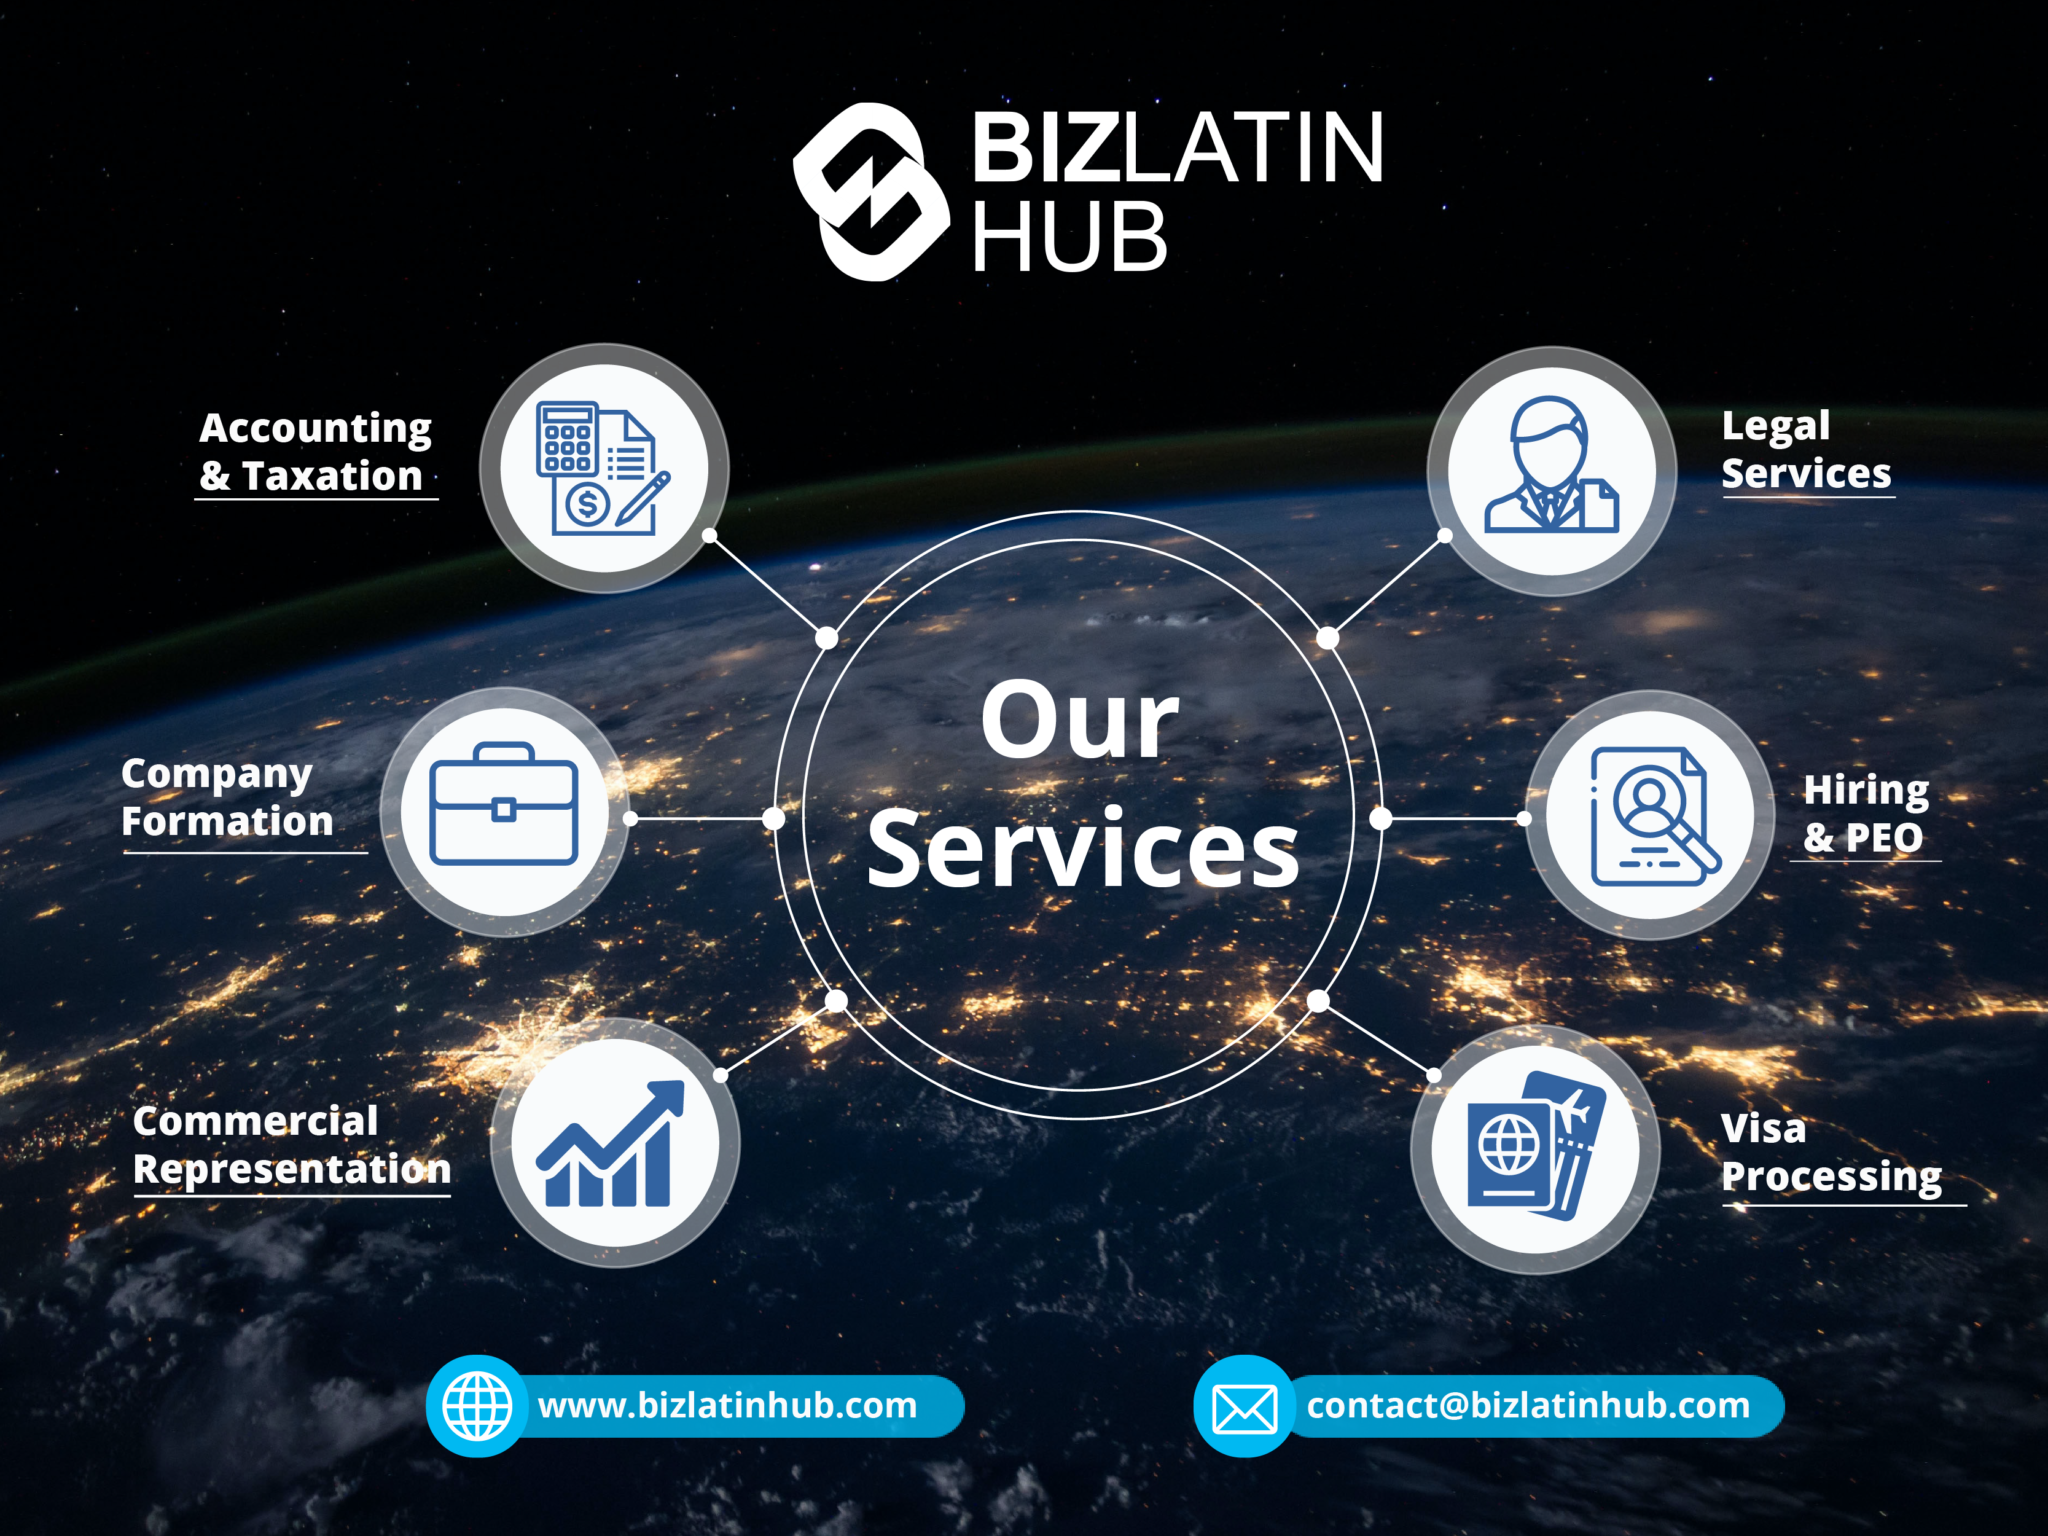 Biz Latin Hub company formation services. Useful for anyone who want to set a business in Uruguay.